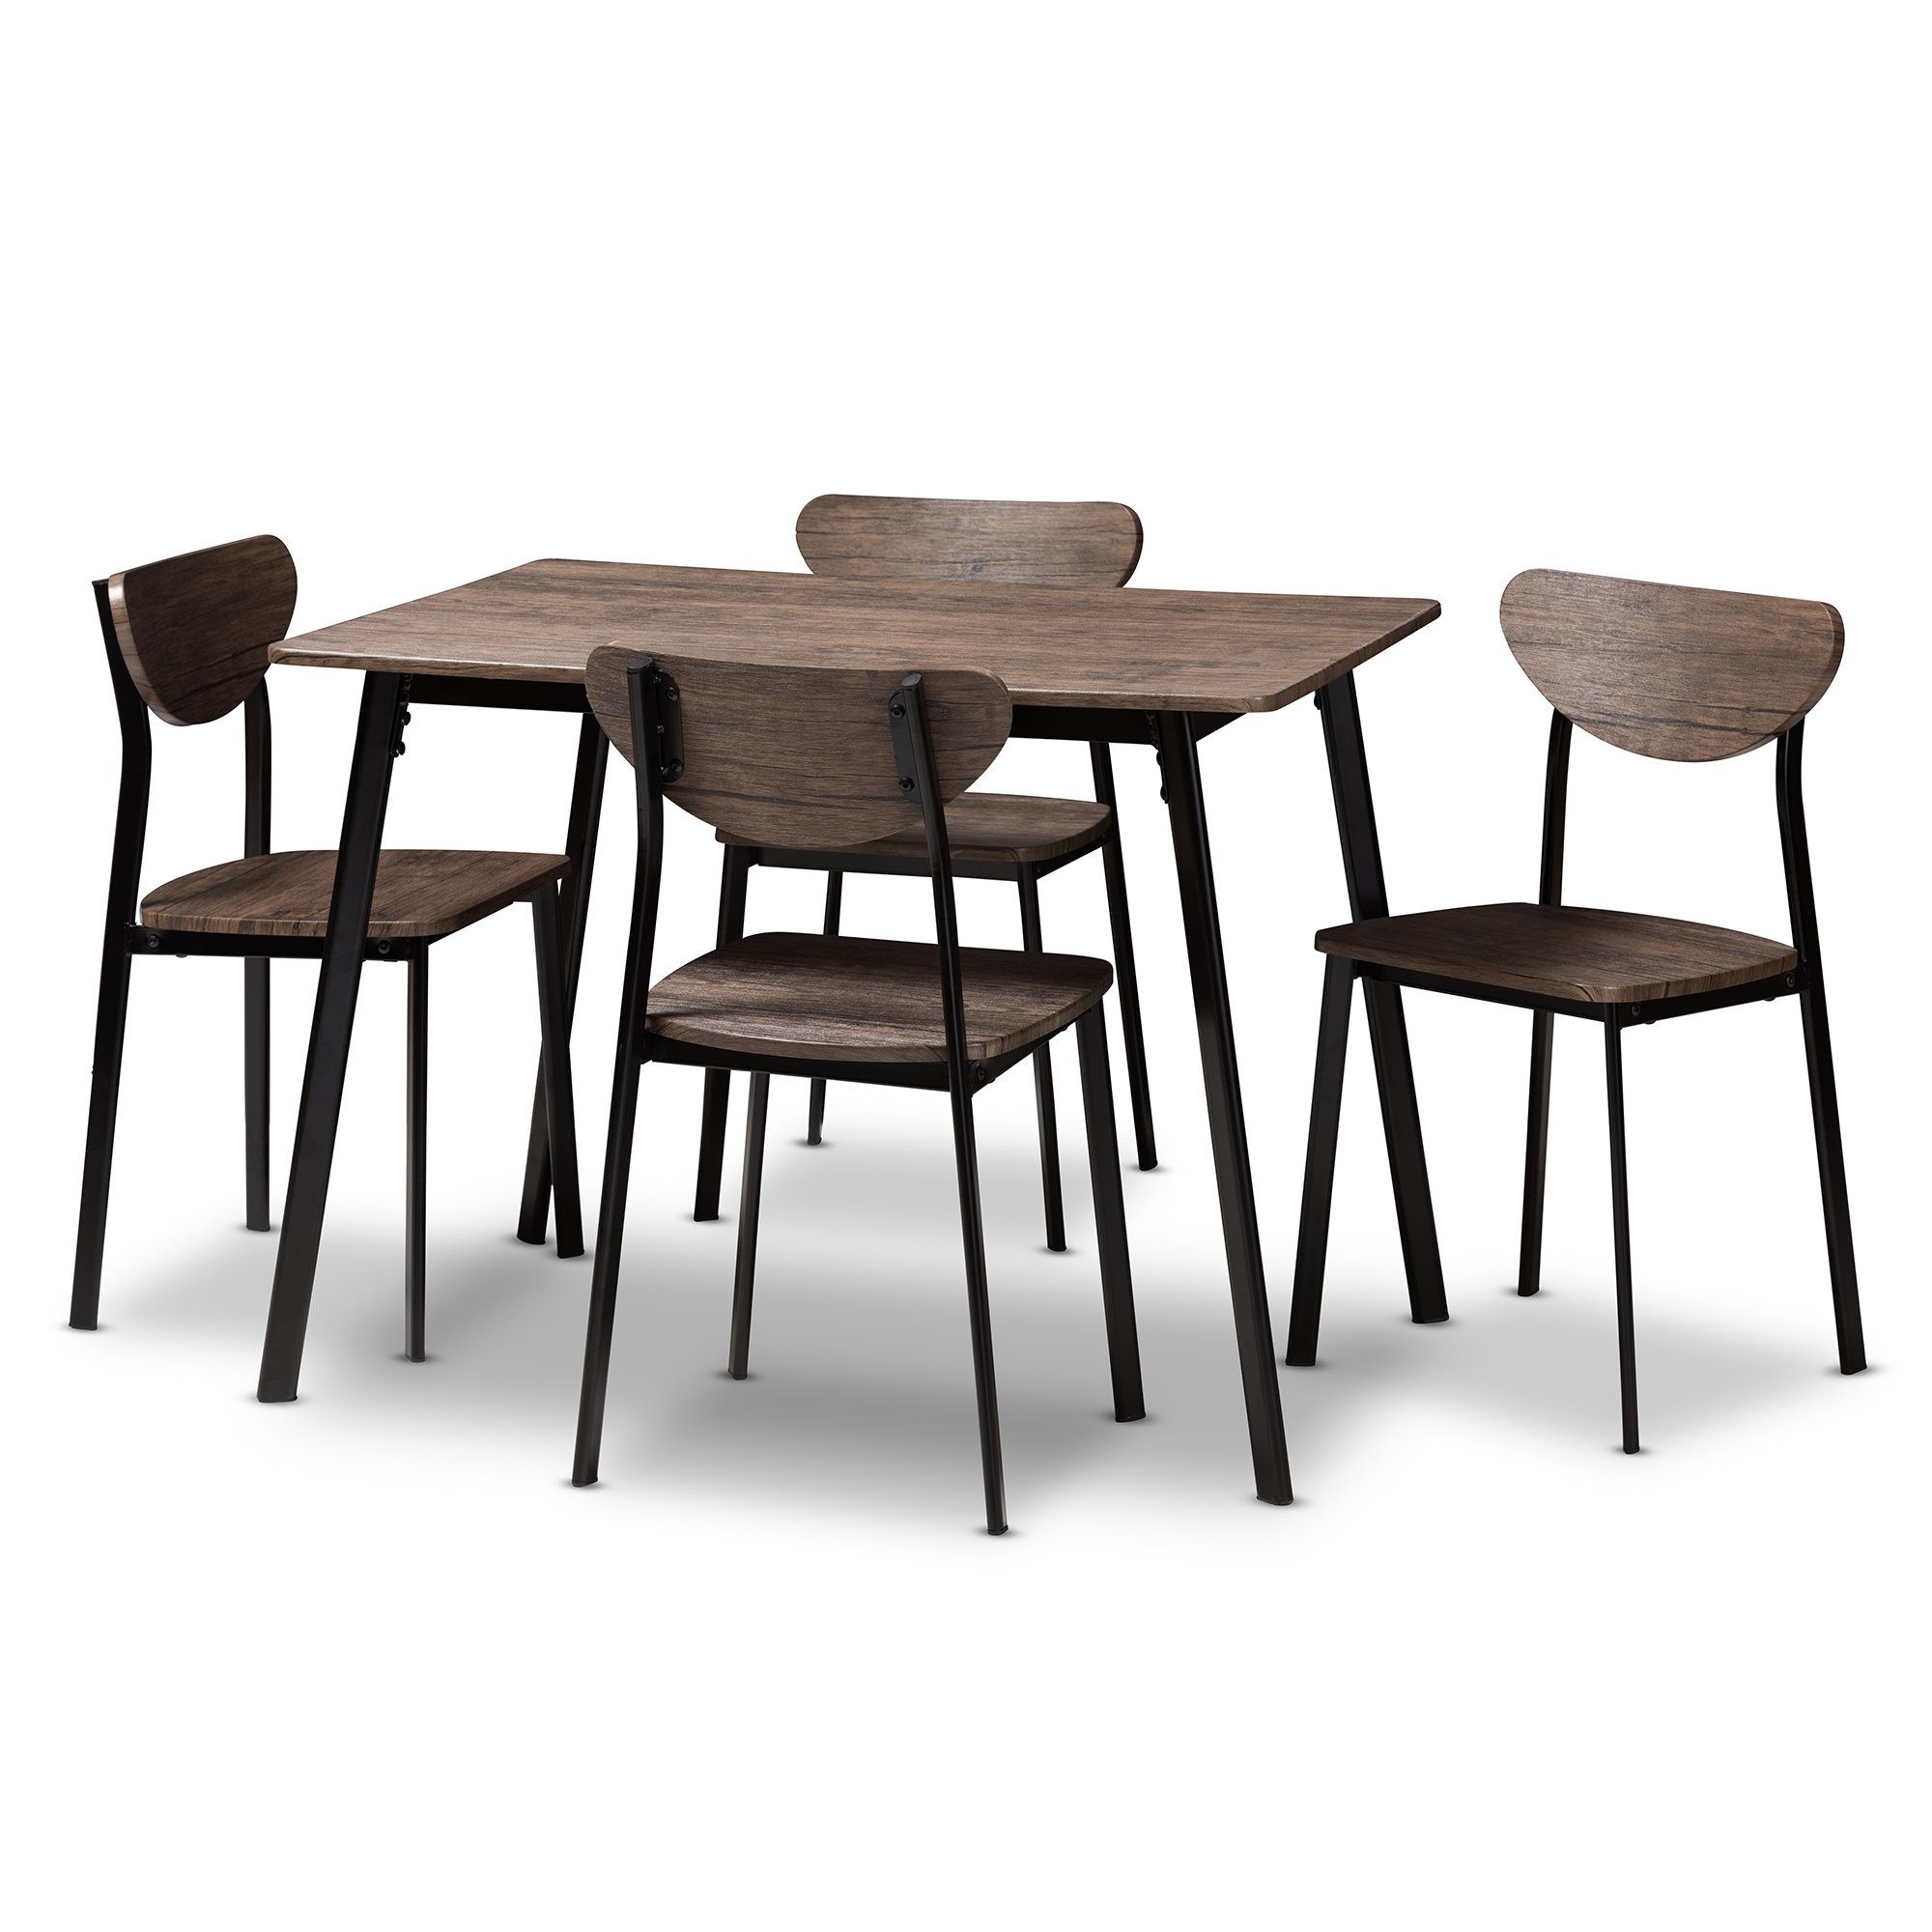 Tejeda 5 Piece Dining Set Intended For 2018 Tejeda 5 Piece Dining Sets (View 1 of 20)